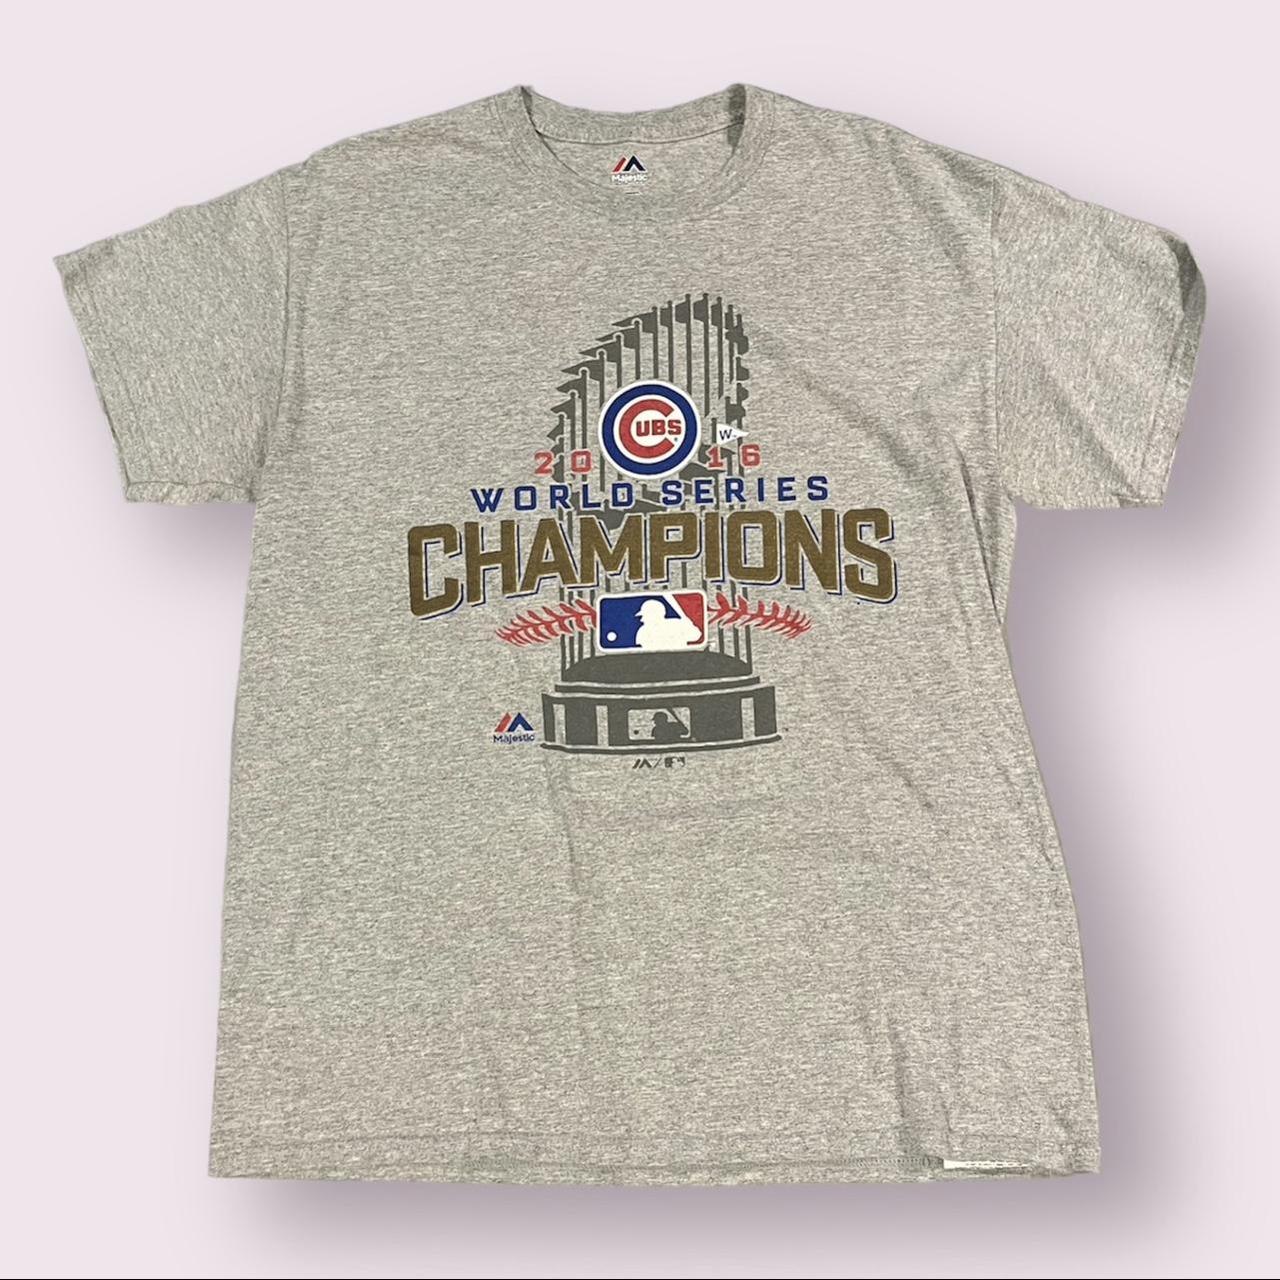 Chicago Cubs Graphic T-Shirt